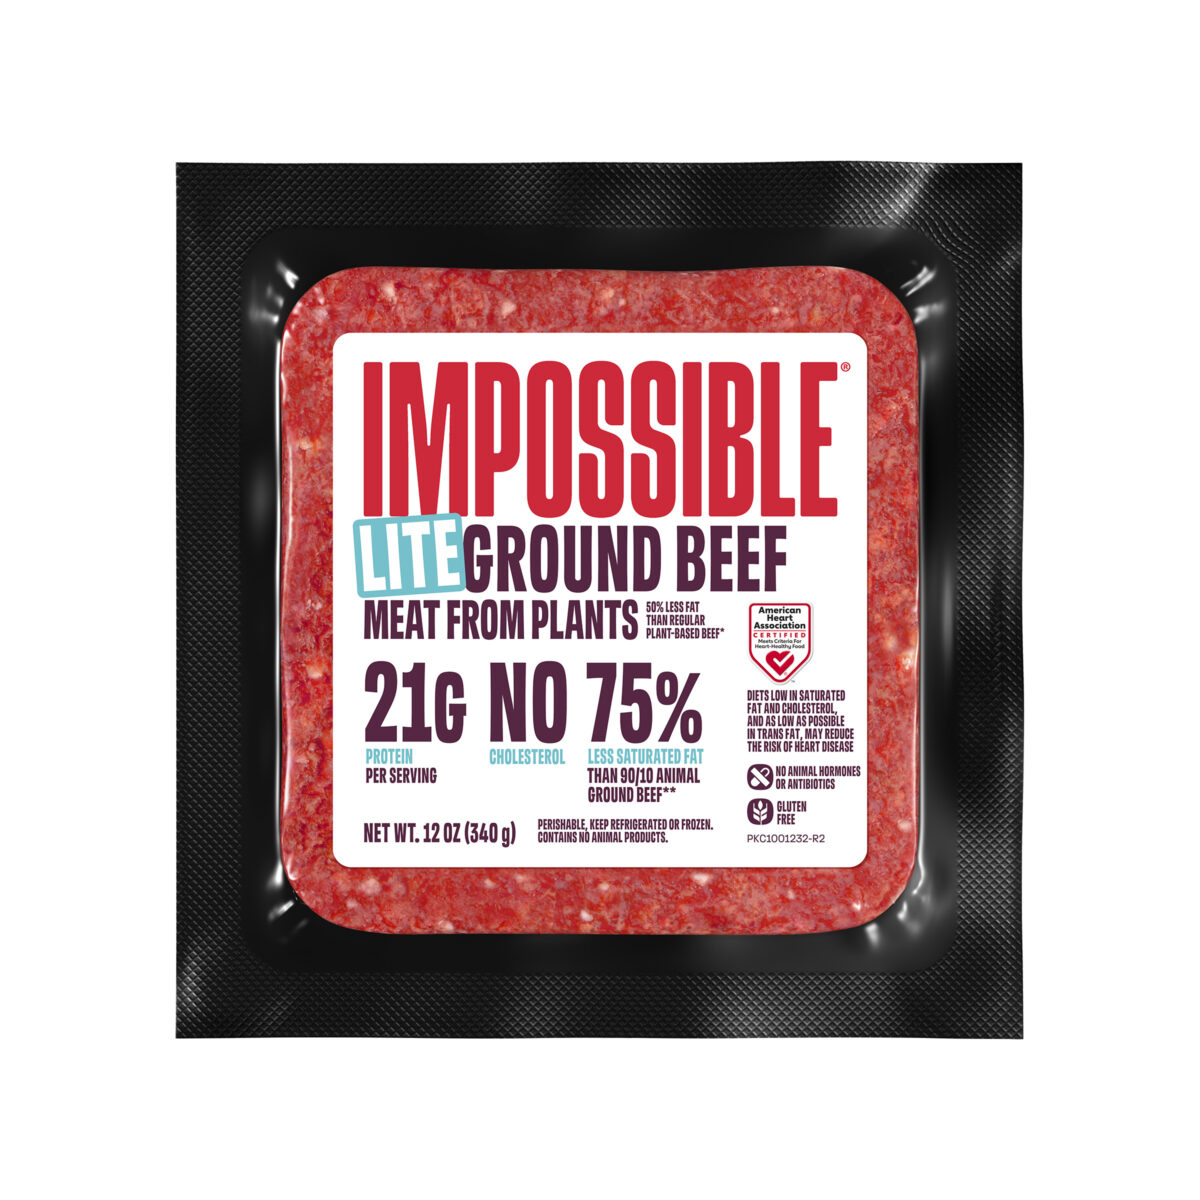 Photo shows a package of Impossible's plant-based Ground Beef with new red packaging